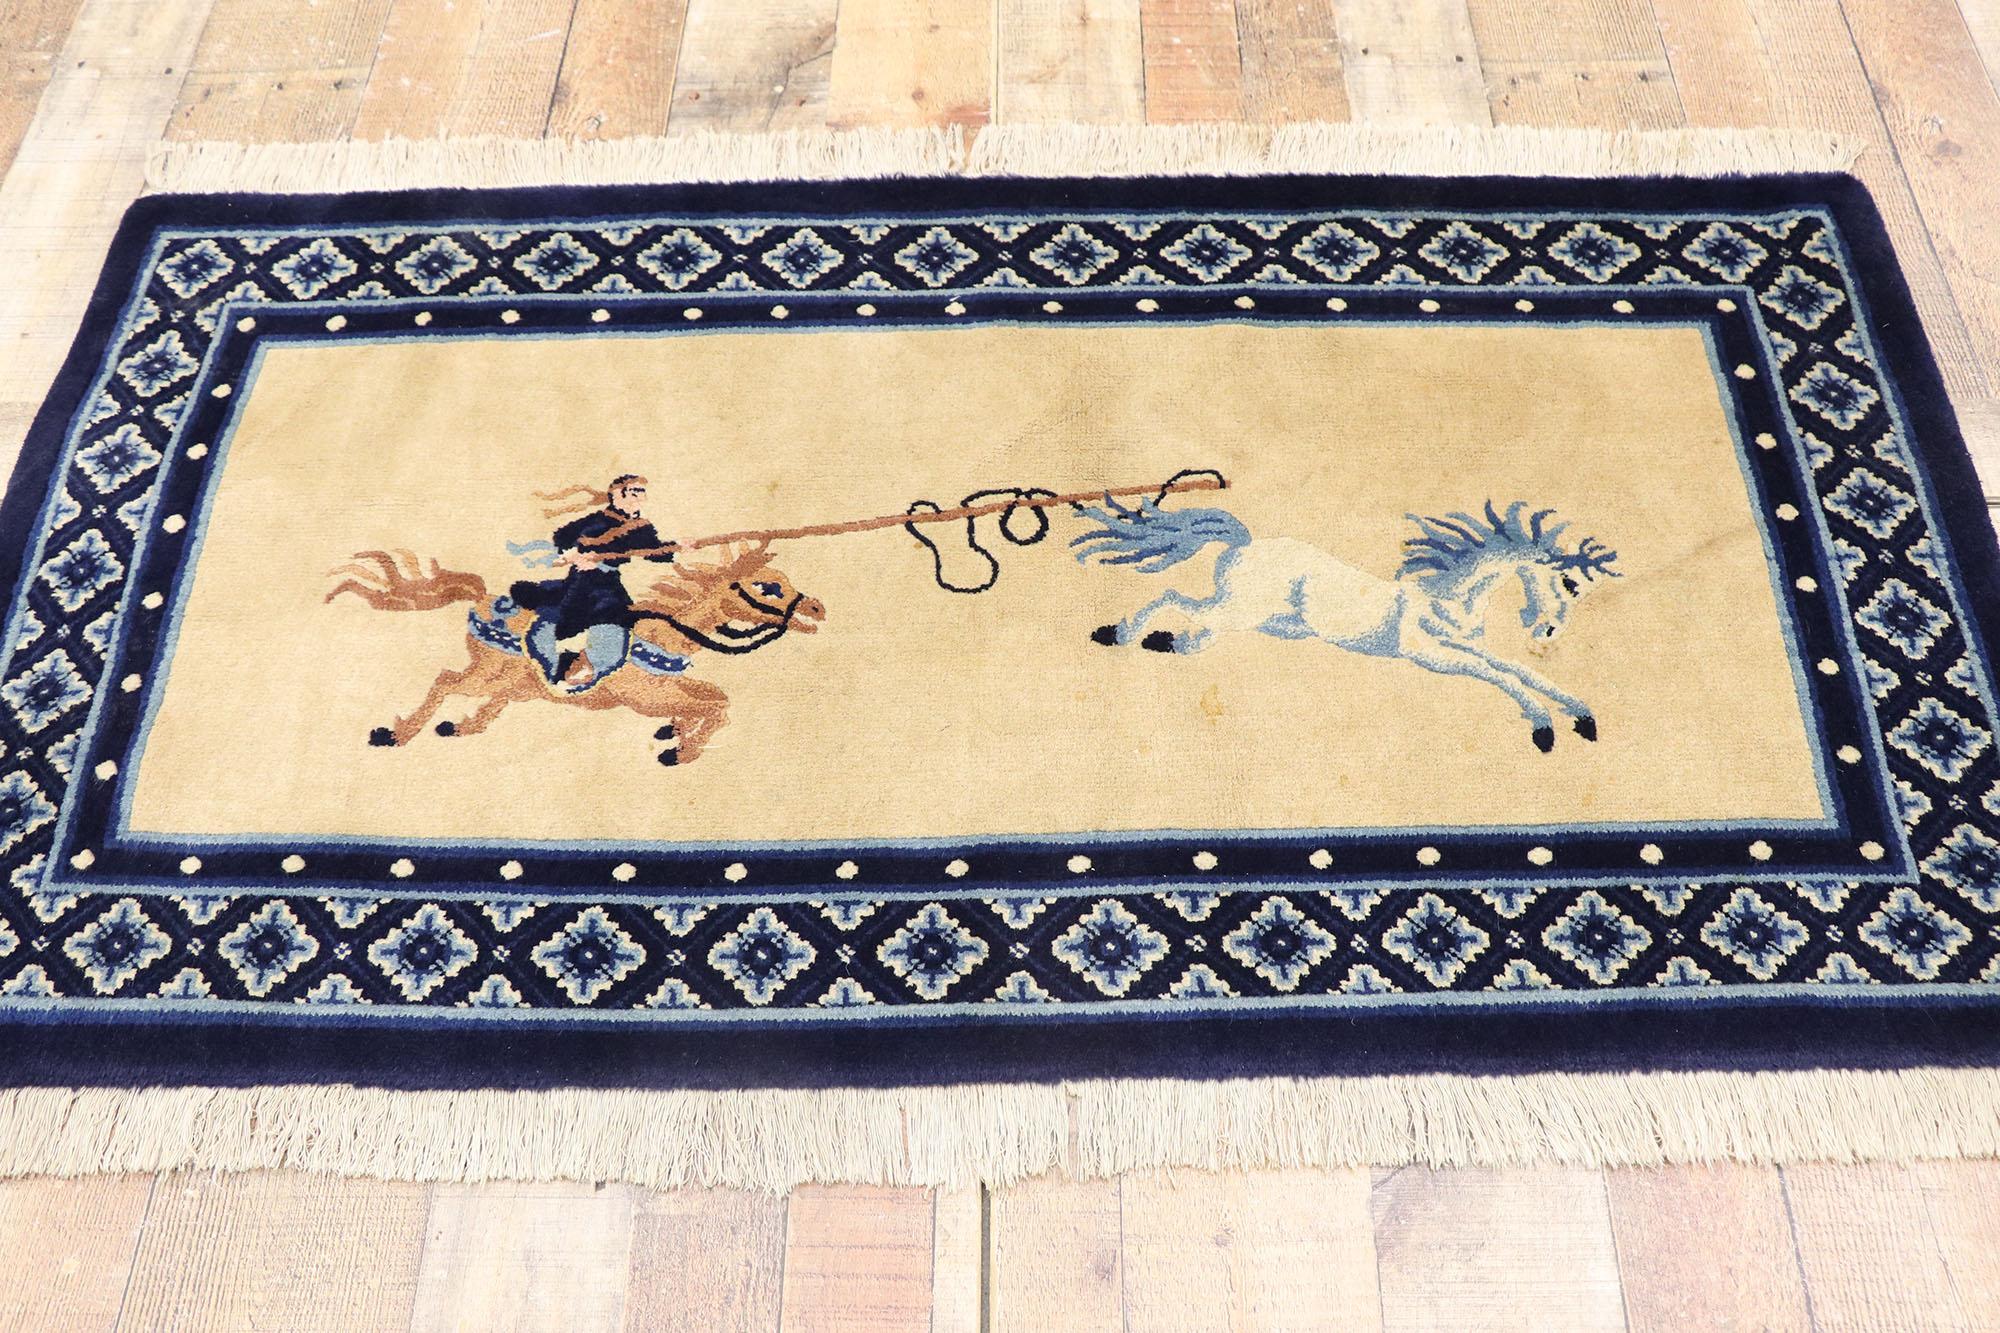 20th Century Antique Chinese Art Deco Pictorial Rug with Samurai and Wild Horse For Sale